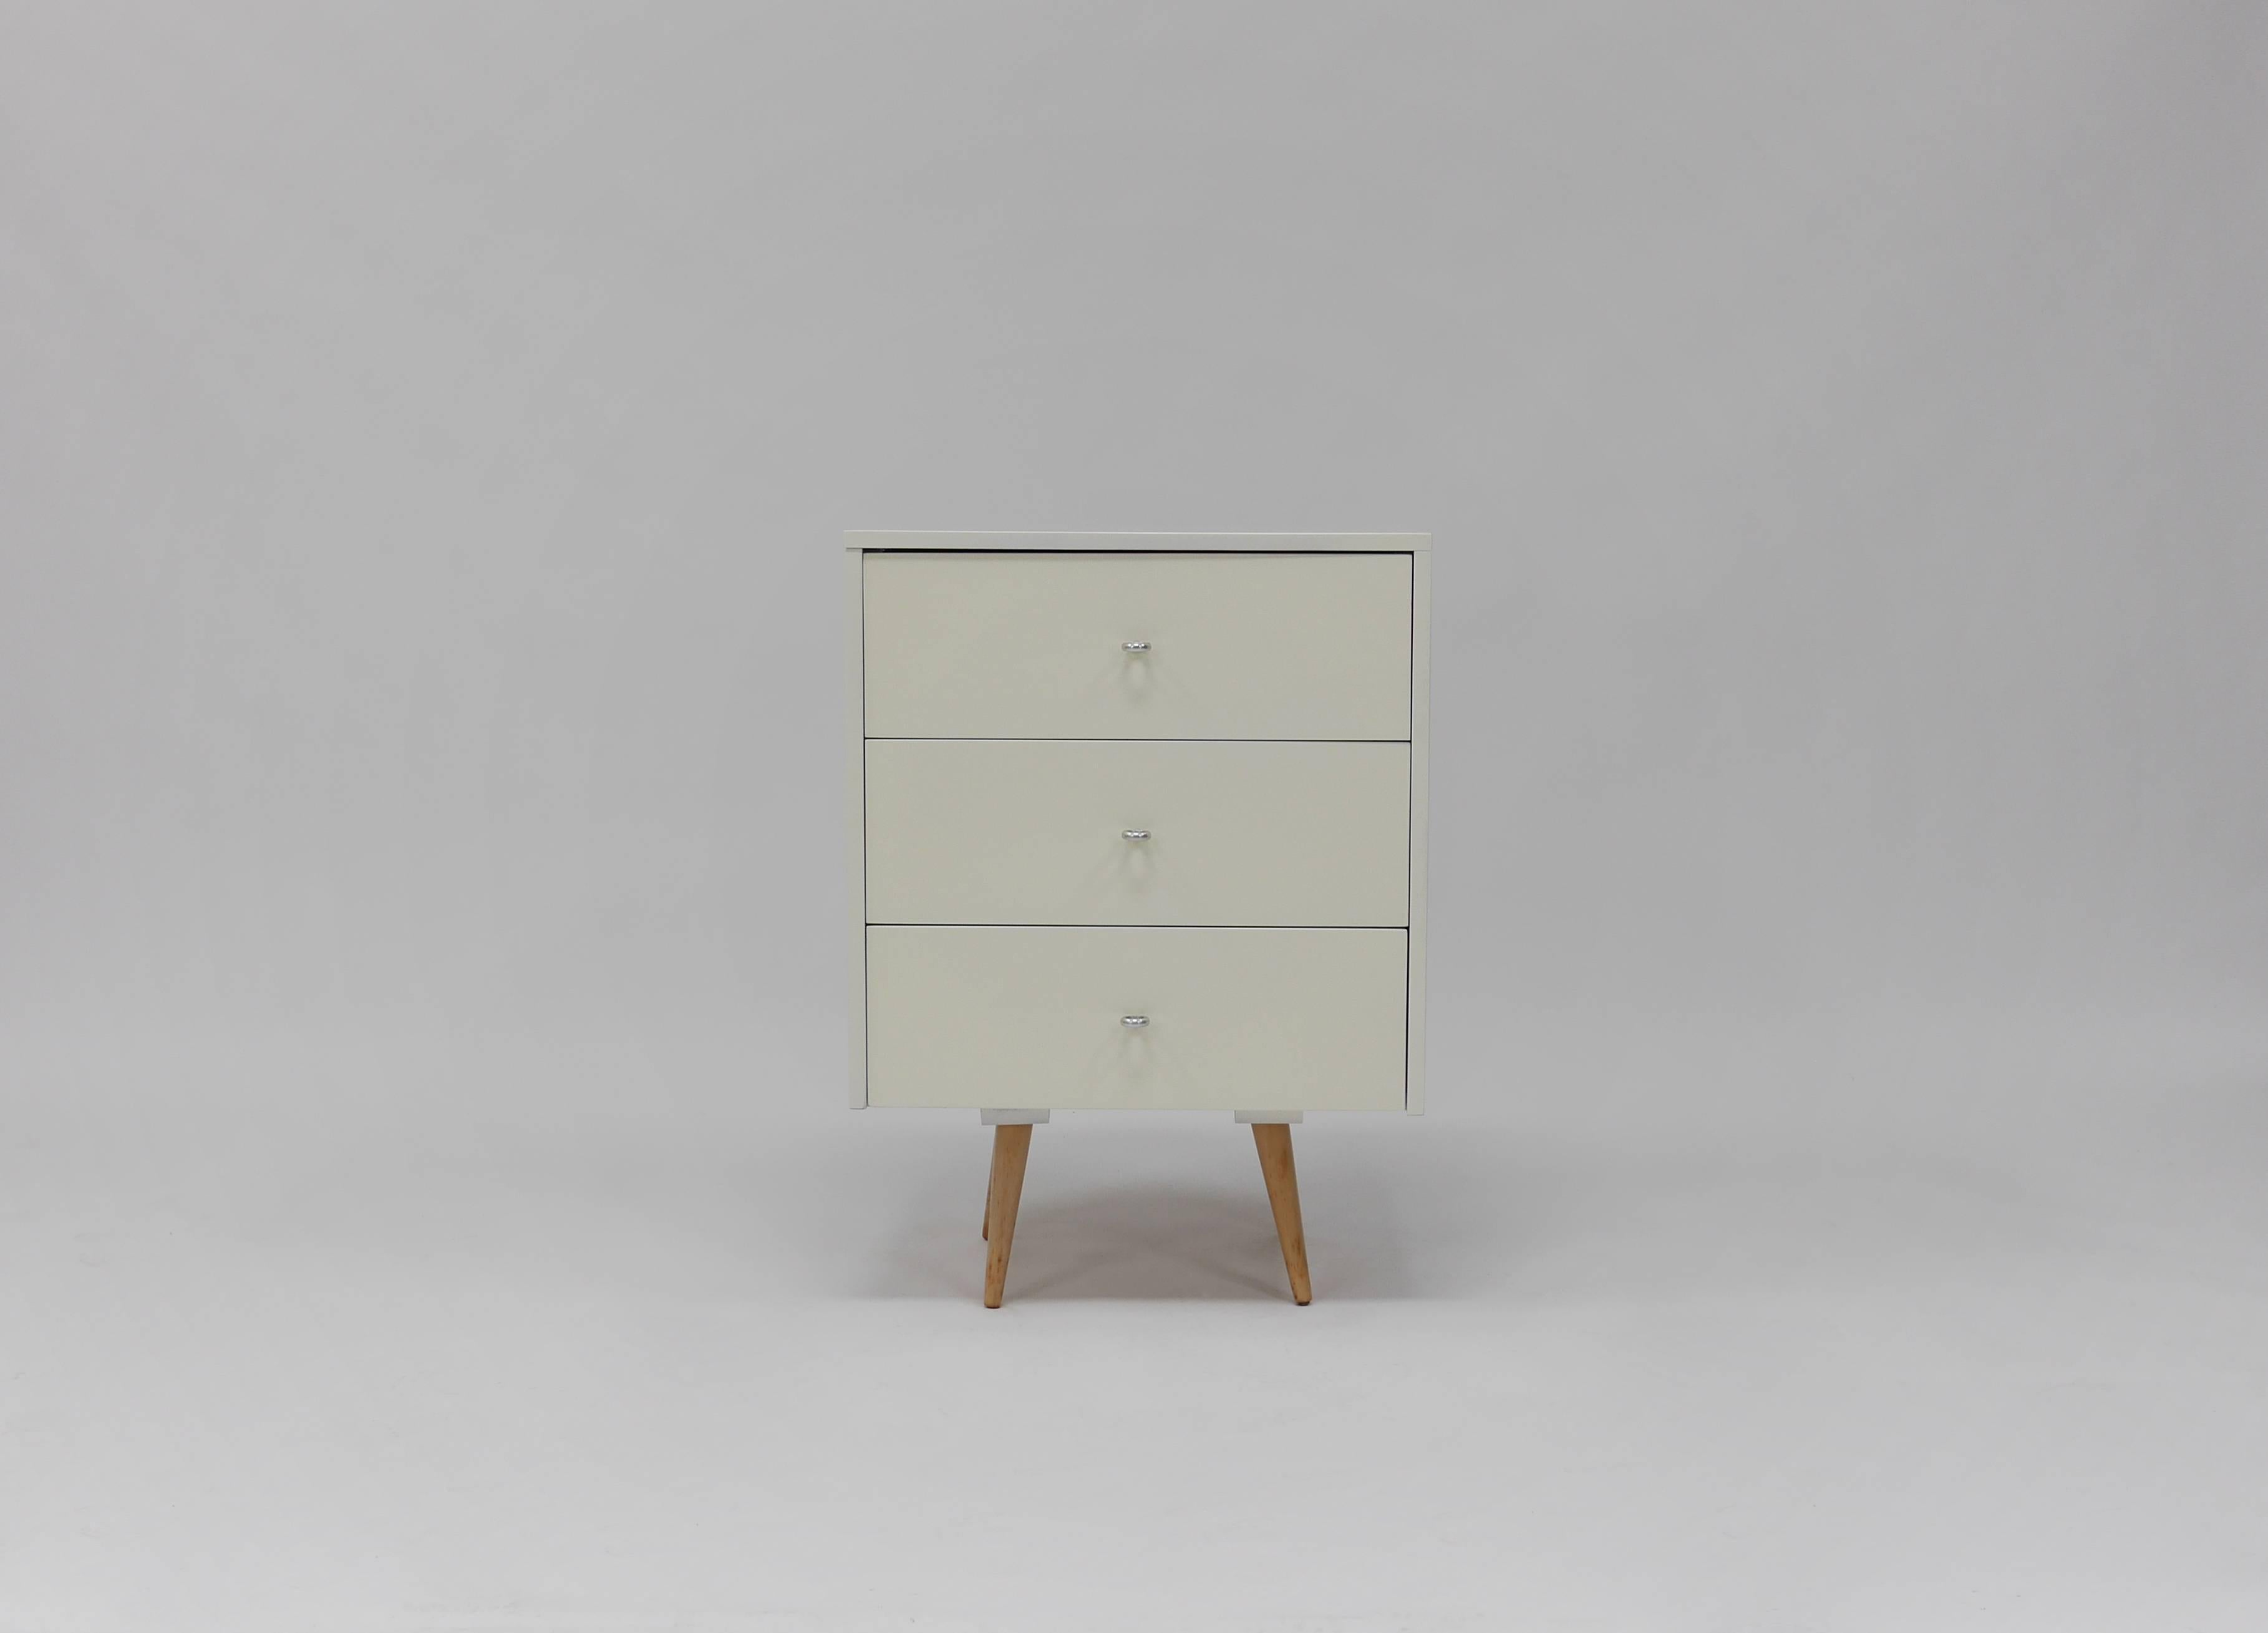 Pair of nightstands / petite chests in white lacquer by Paul McCobb.
Measures: 24' wide, 33.5